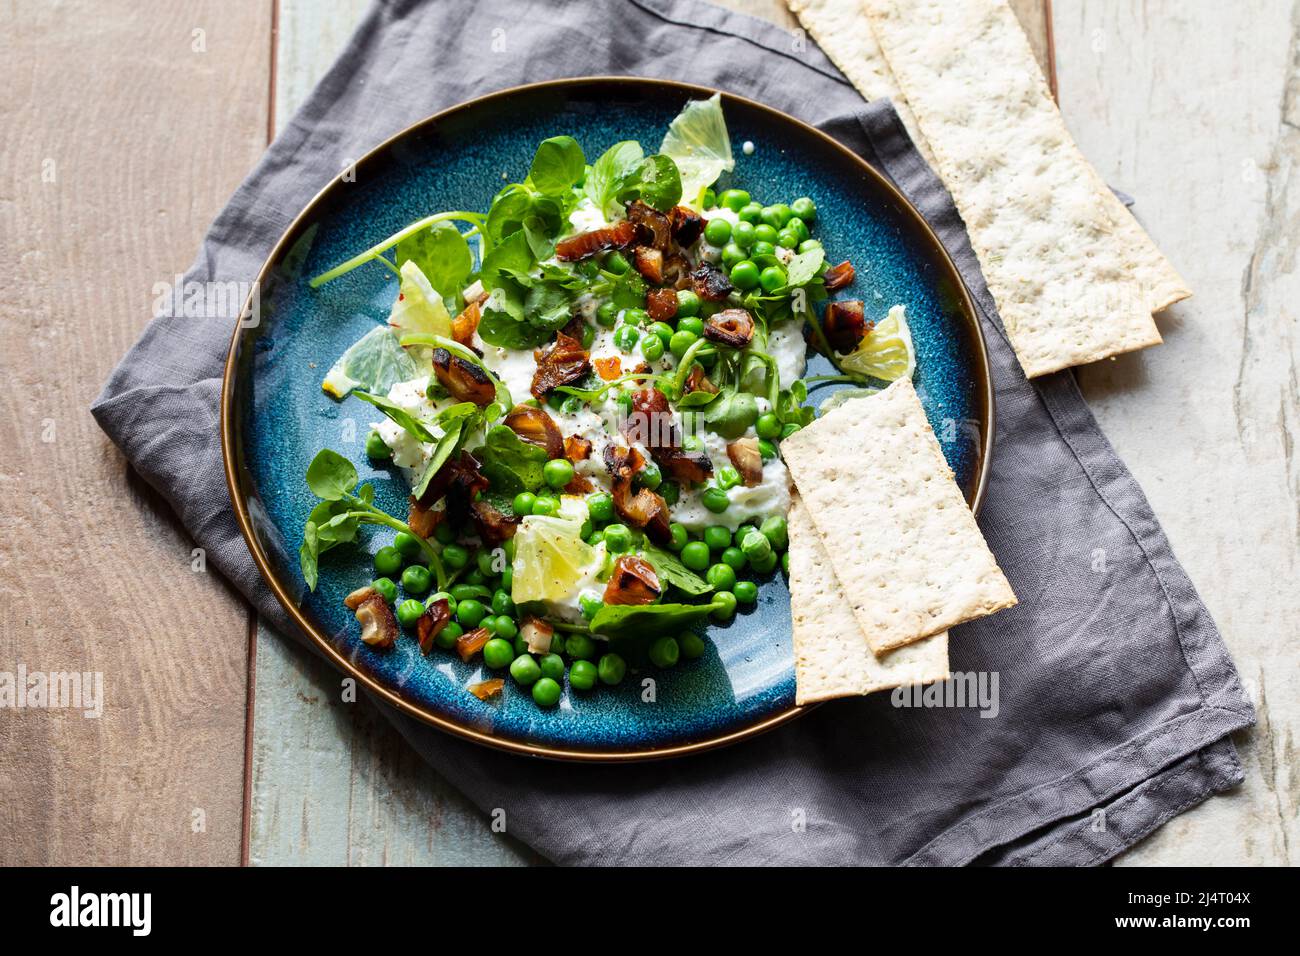 Ricotta cheese, green peas, watercress and dates salad Stock Photo